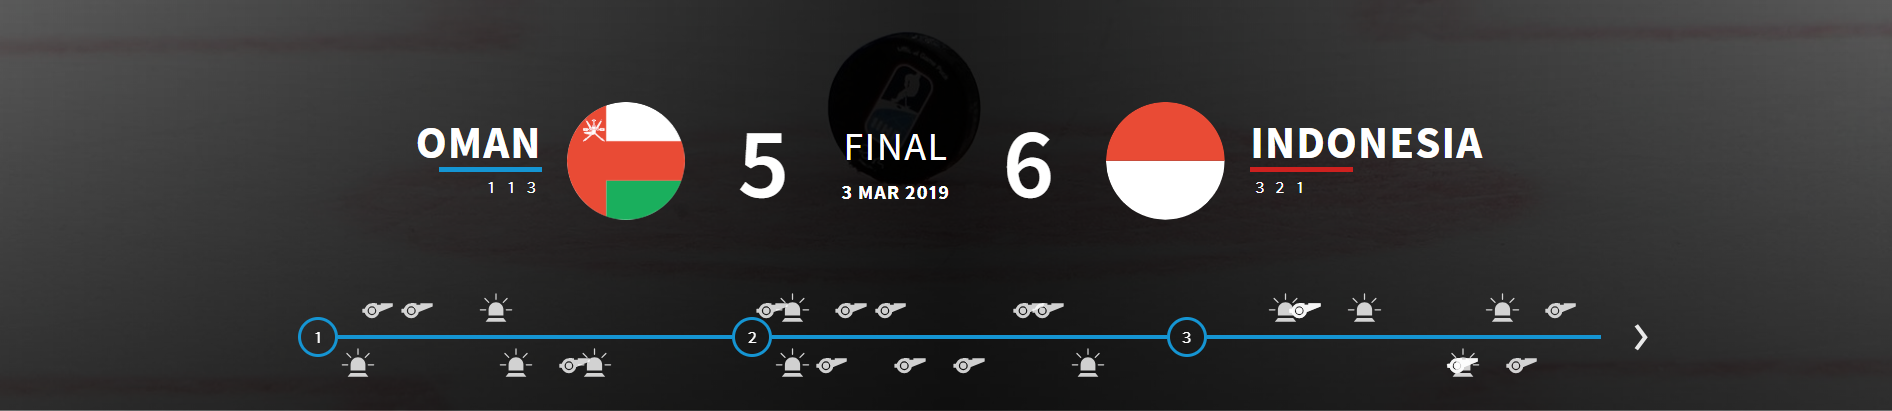 Indonesia edged Oman to make it three wins out of three in Group B ©IIHF